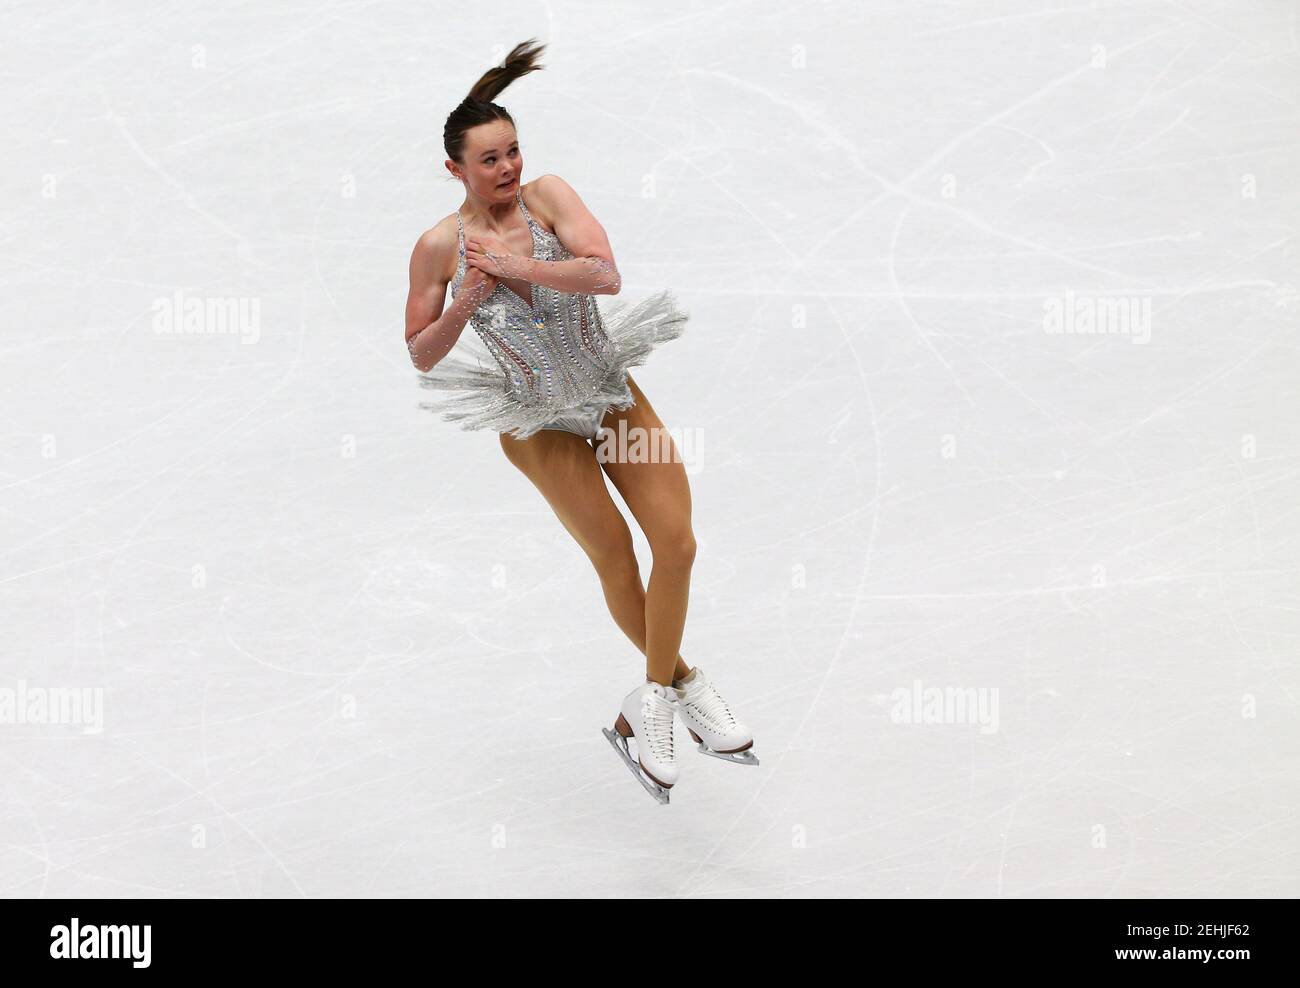 Figure Skating - World Figure Skating Championships - The Mediolanum Forum, Milan, Italy - March 21, 2018   Mariah Bell of the U.S. during the Ladies Short Programme   REUTERS/Alessandro Bianchi Stock Photo